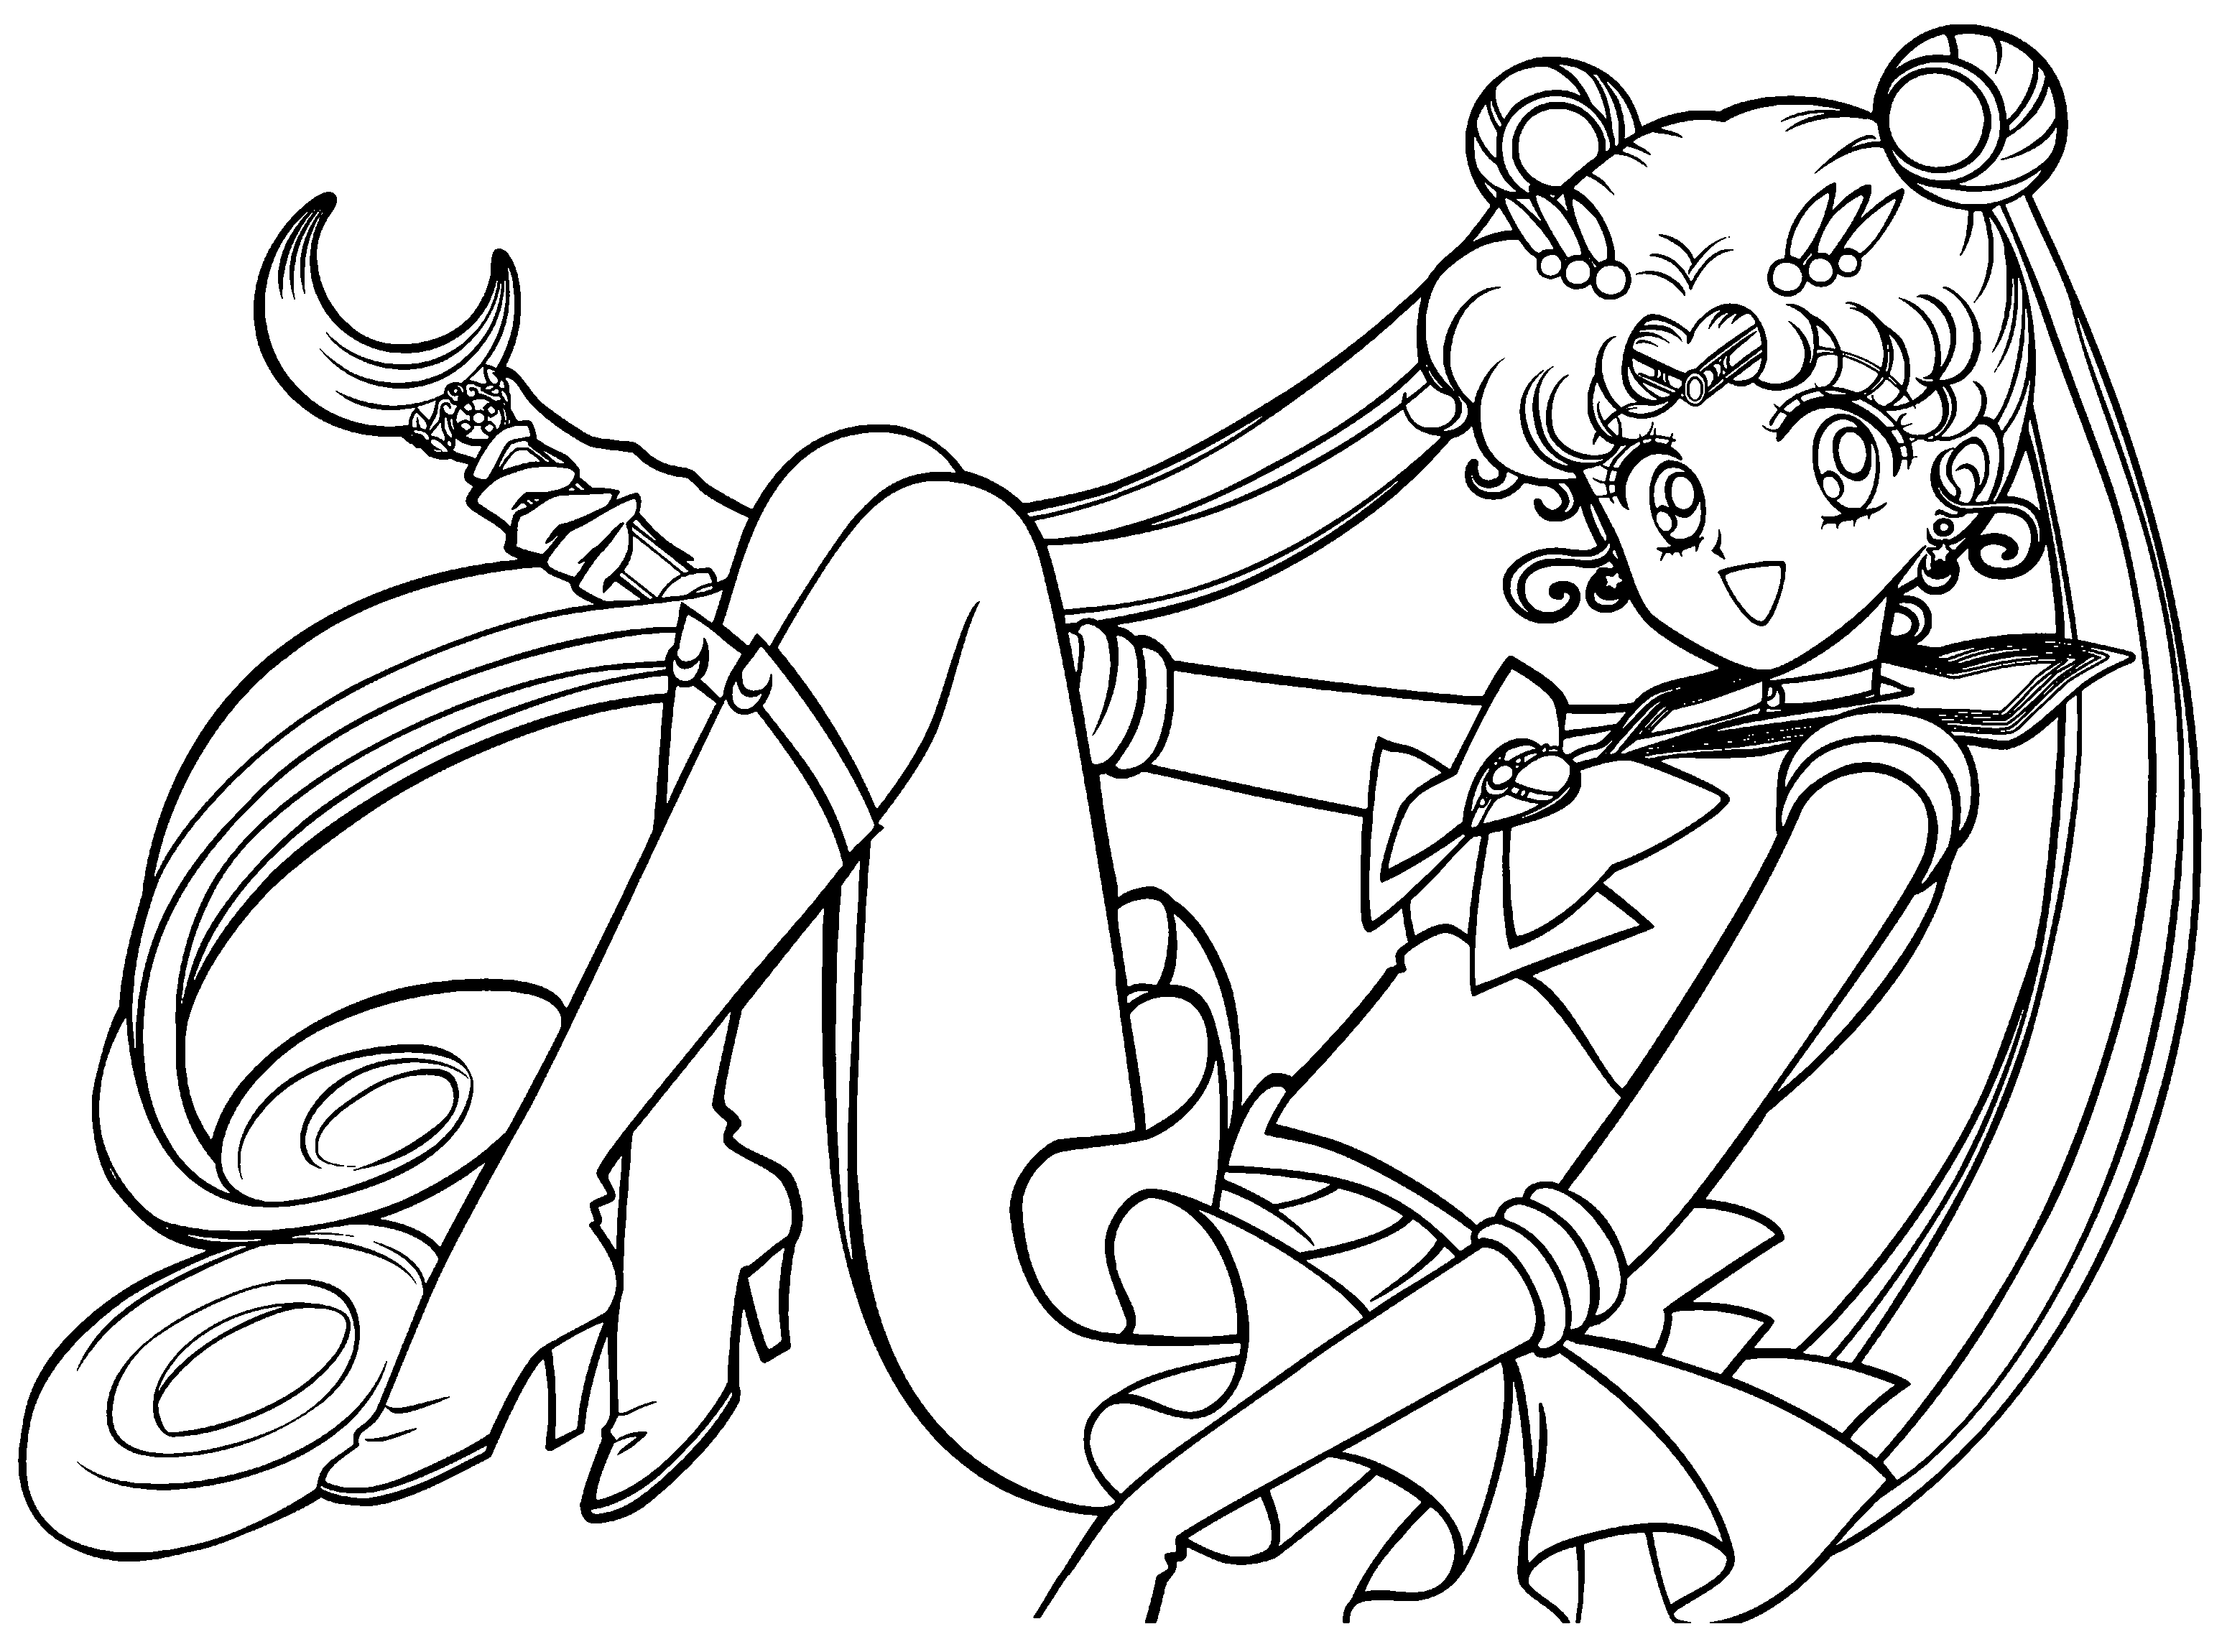 Sailor Moon Coloring Book - Coloring Pages for Kids and for Adults